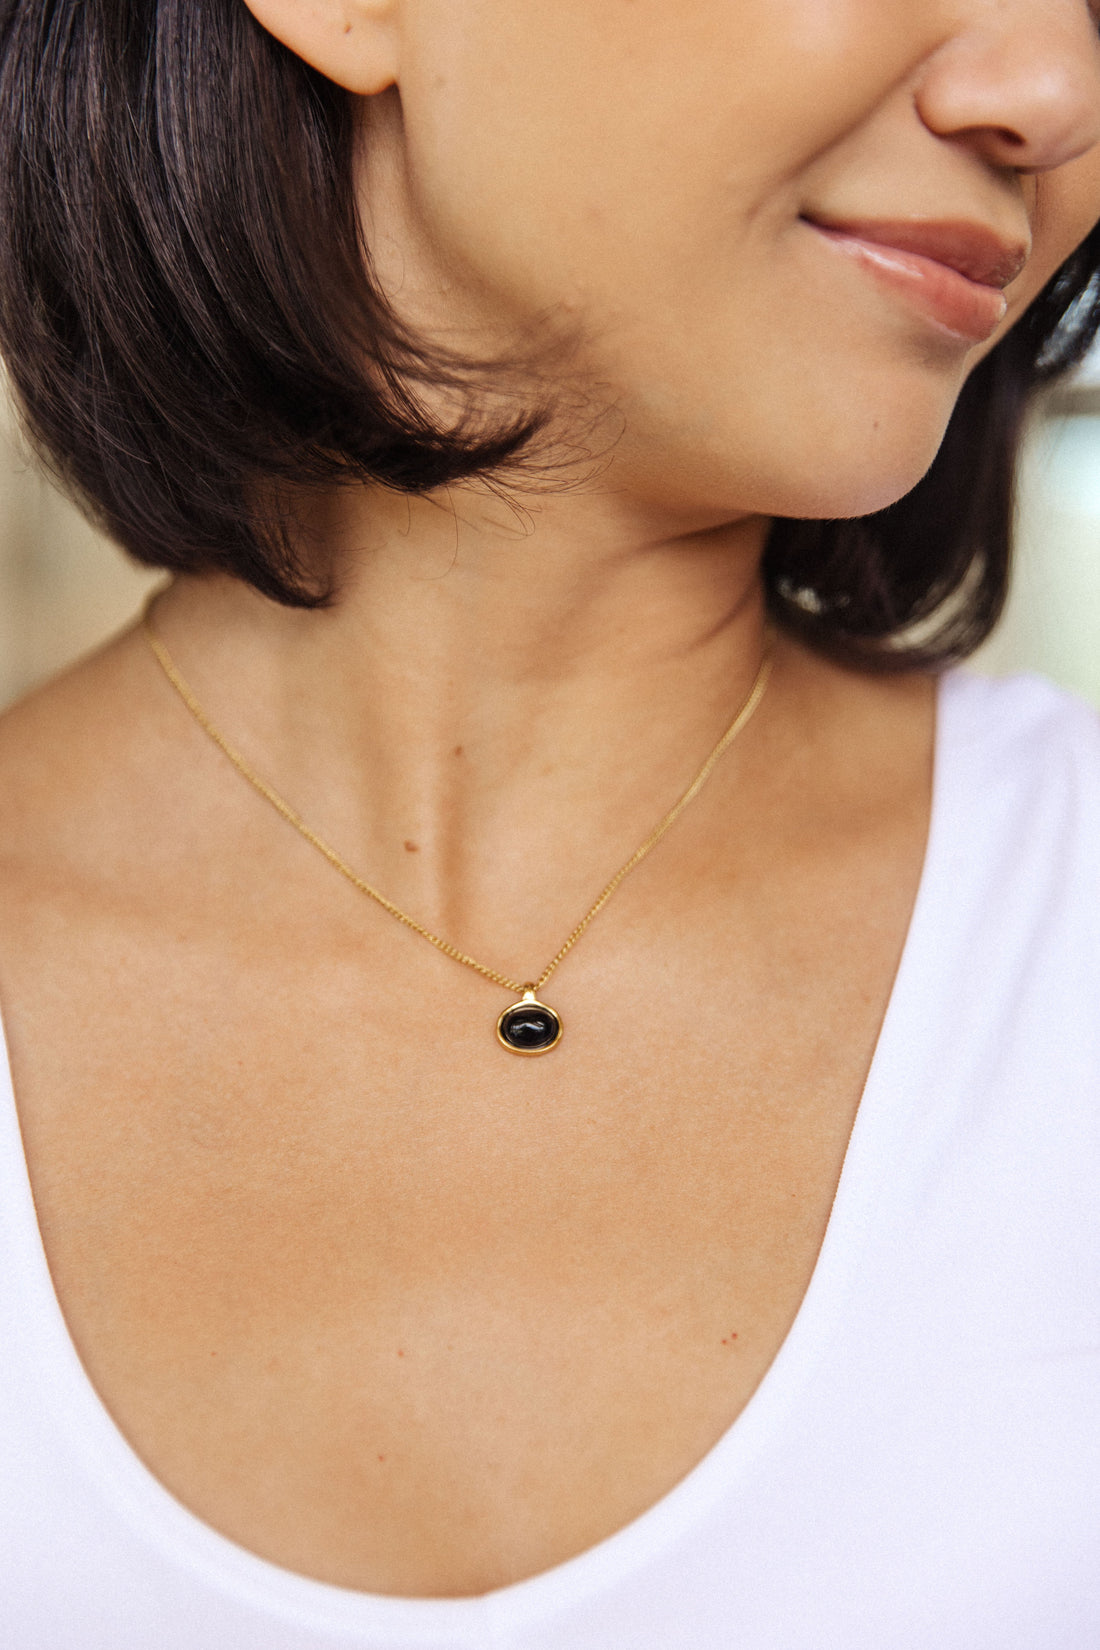 Center Of It All Pendent Necklace - WEBSITE EXCLUSIVE